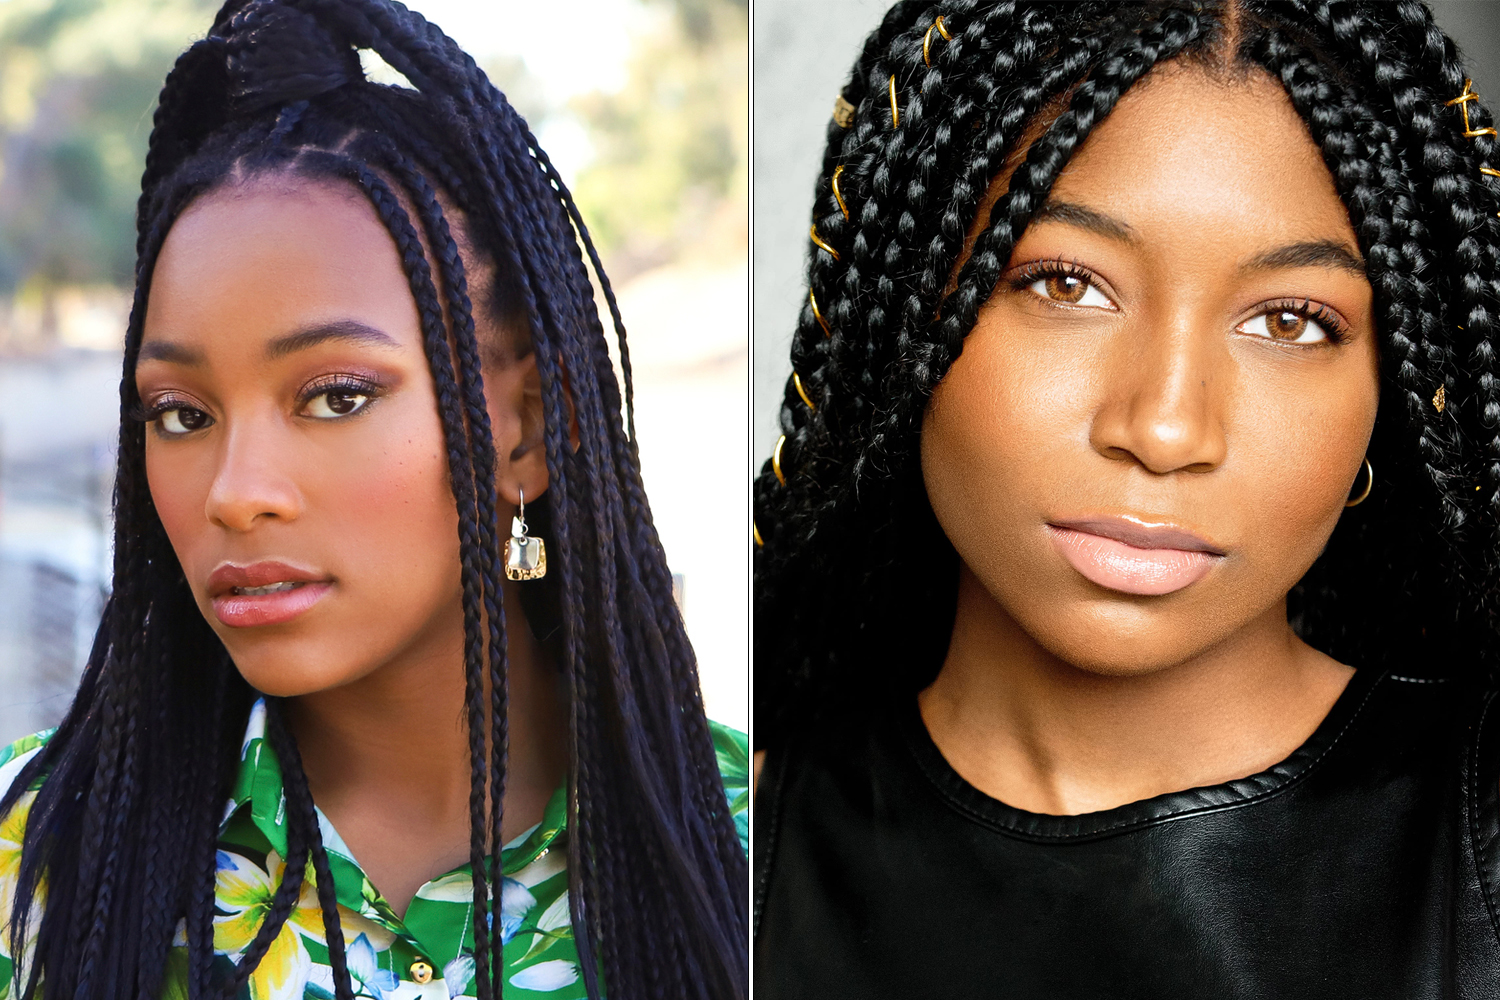 Is Sydney Mikayla Leaving General Hospital, and Role of Trina Robinson? Meet Tabyana Ali Parents